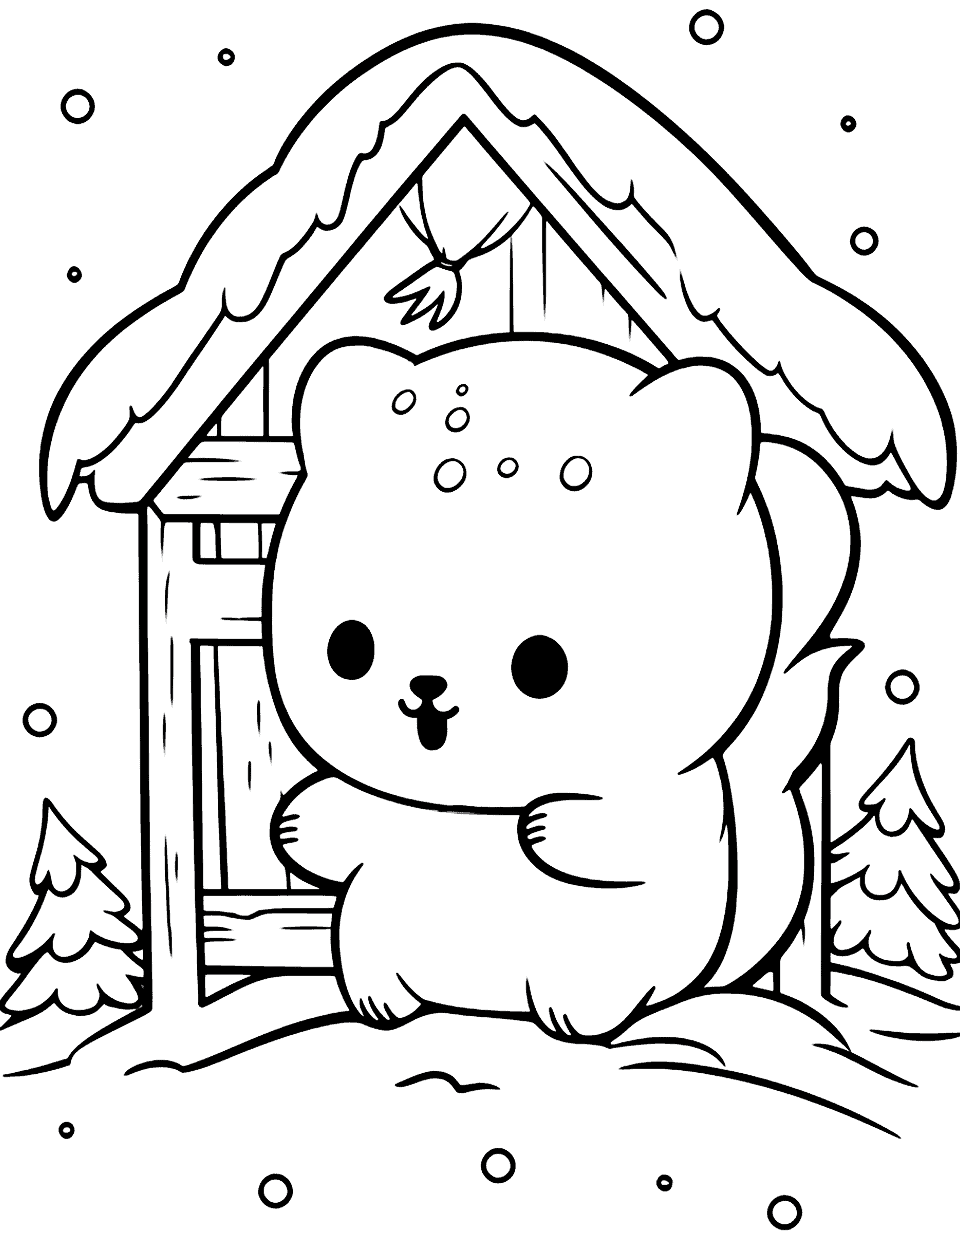 Chibi Wolf's Cute Cabin Kawaii Coloring Page - A Chibi wolf cozying up in its adorable cabin during a snowy winter night.